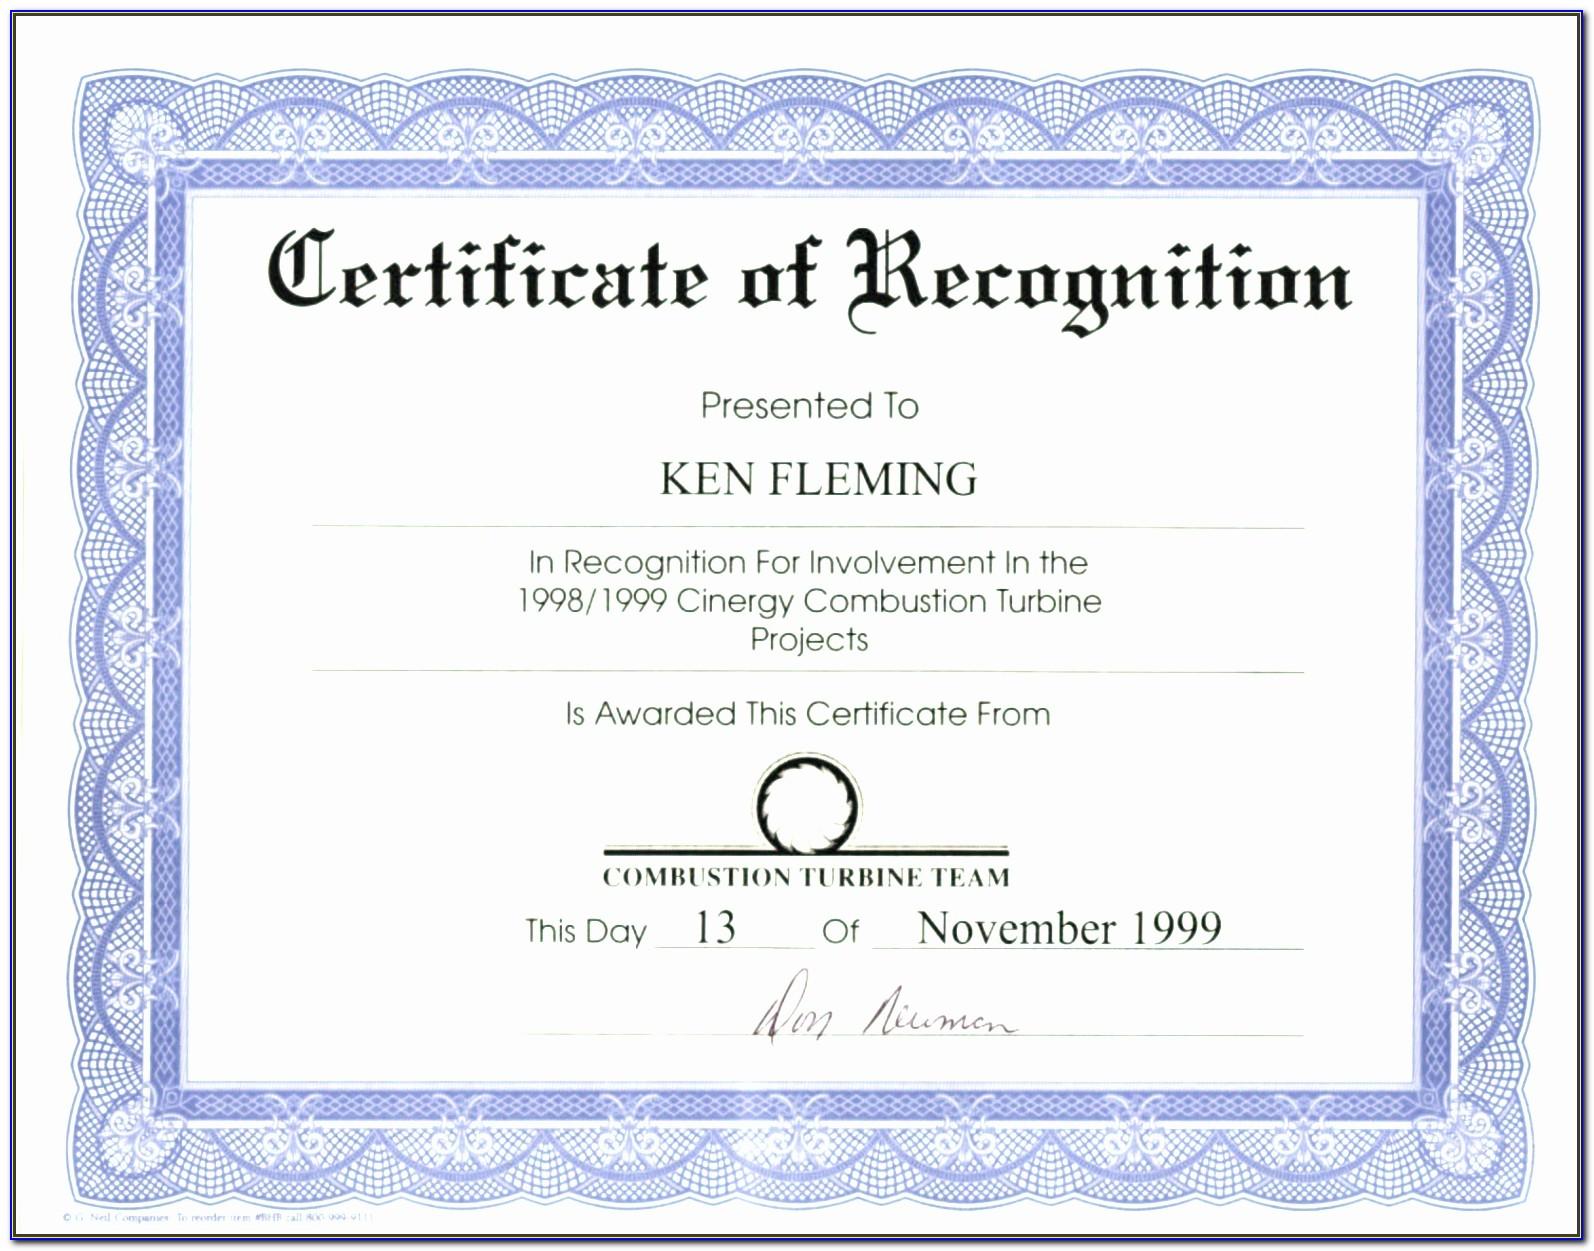 Word Template For Certificate Of Appreciation